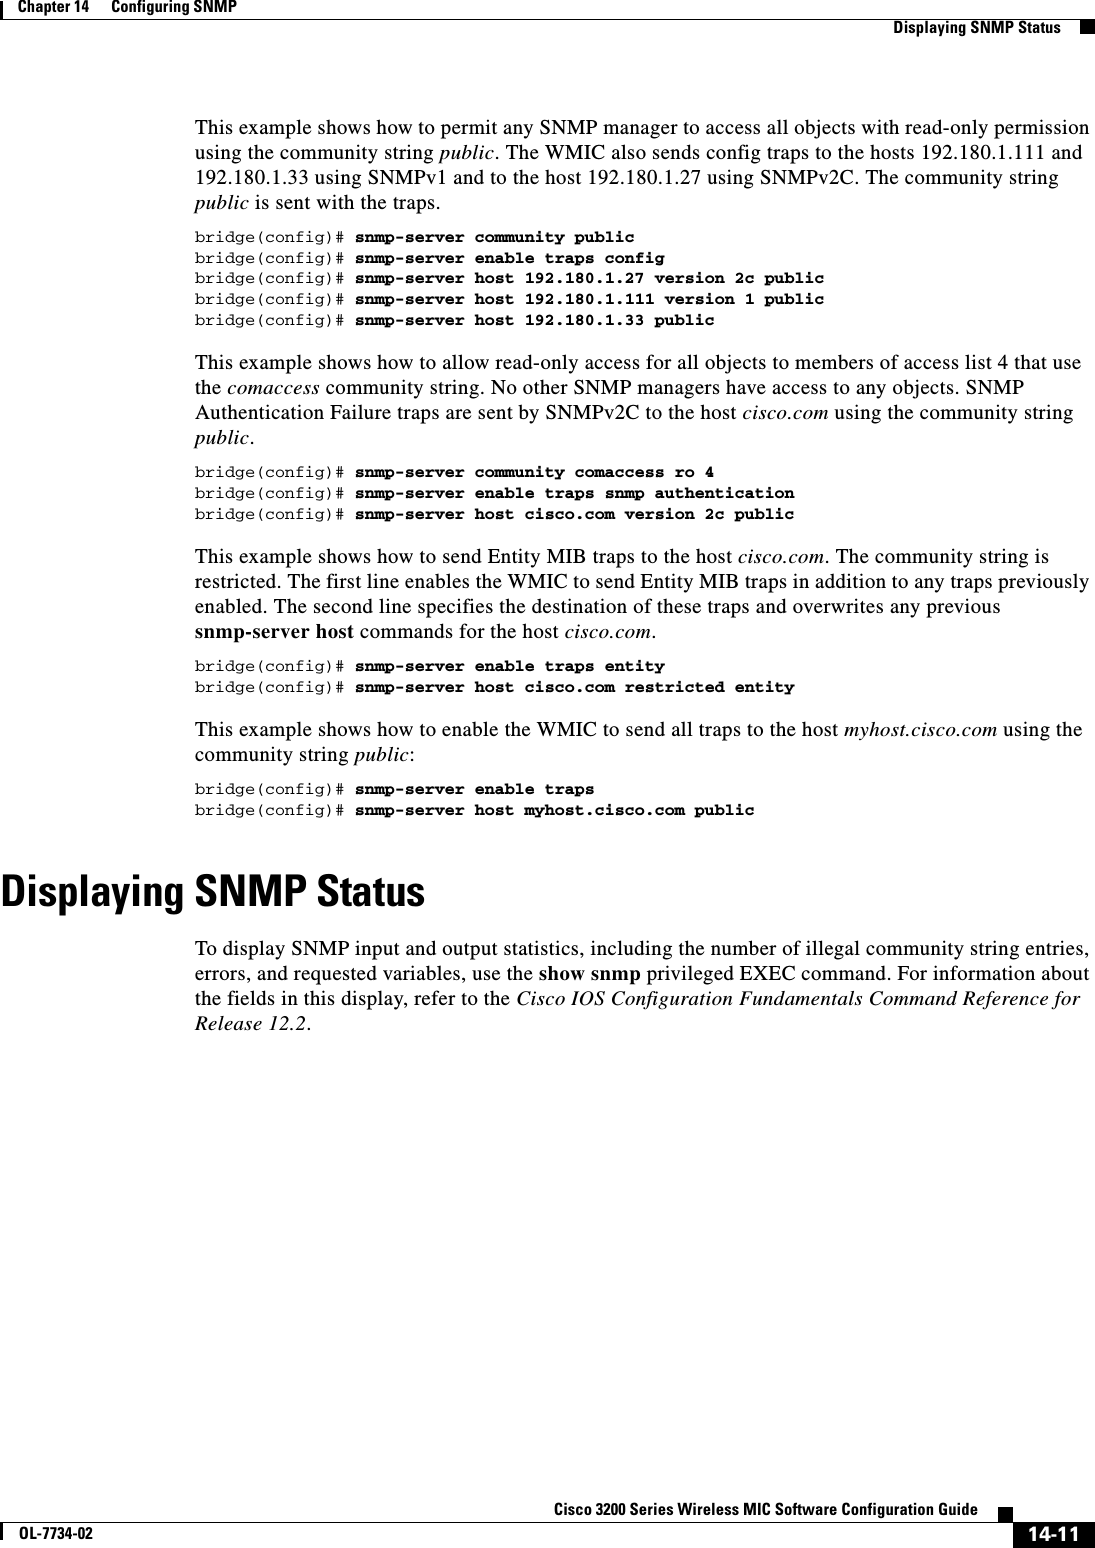 14-11Cisco 3200 Series Wireless MIC Software Configuration GuideOL-7734-02Chapter 14      Configuring SNMPDisplaying SNMP StatusThis example shows how to permit any SNMP manager to access all objects with read-only permission using the community string public. The WMIC also sends config traps to the hosts 192.180.1.111 and 192.180.1.33 using SNMPv1 and to the host 192.180.1.27 using SNMPv2C. The community string public is sent with the traps.bridge(config)# snmp-server community publicbridge(config)# snmp-server enable traps configbridge(config)# snmp-server host 192.180.1.27 version 2c publicbridge(config)# snmp-server host 192.180.1.111 version 1 publicbridge(config)# snmp-server host 192.180.1.33 publicThis example shows how to allow read-only access for all objects to members of access list 4 that use the comaccess community string. No other SNMP managers have access to any objects. SNMP Authentication Failure traps are sent by SNMPv2C to the host cisco.com using the community string public.bridge(config)# snmp-server community comaccess ro 4bridge(config)# snmp-server enable traps snmp authenticationbridge(config)# snmp-server host cisco.com version 2c publicThis example shows how to send Entity MIB traps to the host cisco.com. The community string is restricted. The first line enables the WMIC to send Entity MIB traps in addition to any traps previously enabled. The second line specifies the destination of these traps and overwrites any previous snmp-server host commands for the host cisco.com.bridge(config)# snmp-server enable traps entitybridge(config)# snmp-server host cisco.com restricted entityThis example shows how to enable the WMIC to send all traps to the host myhost.cisco.com using the community string public:bridge(config)# snmp-server enable trapsbridge(config)# snmp-server host myhost.cisco.com publicDisplaying SNMP StatusTo display SNMP input and output statistics, including the number of illegal community string entries, errors, and requested variables, use the show snmp privileged EXEC command. For information about the fields in this display, refer to the Cisco IOS Configuration Fundamentals Command Reference for Release 12.2.